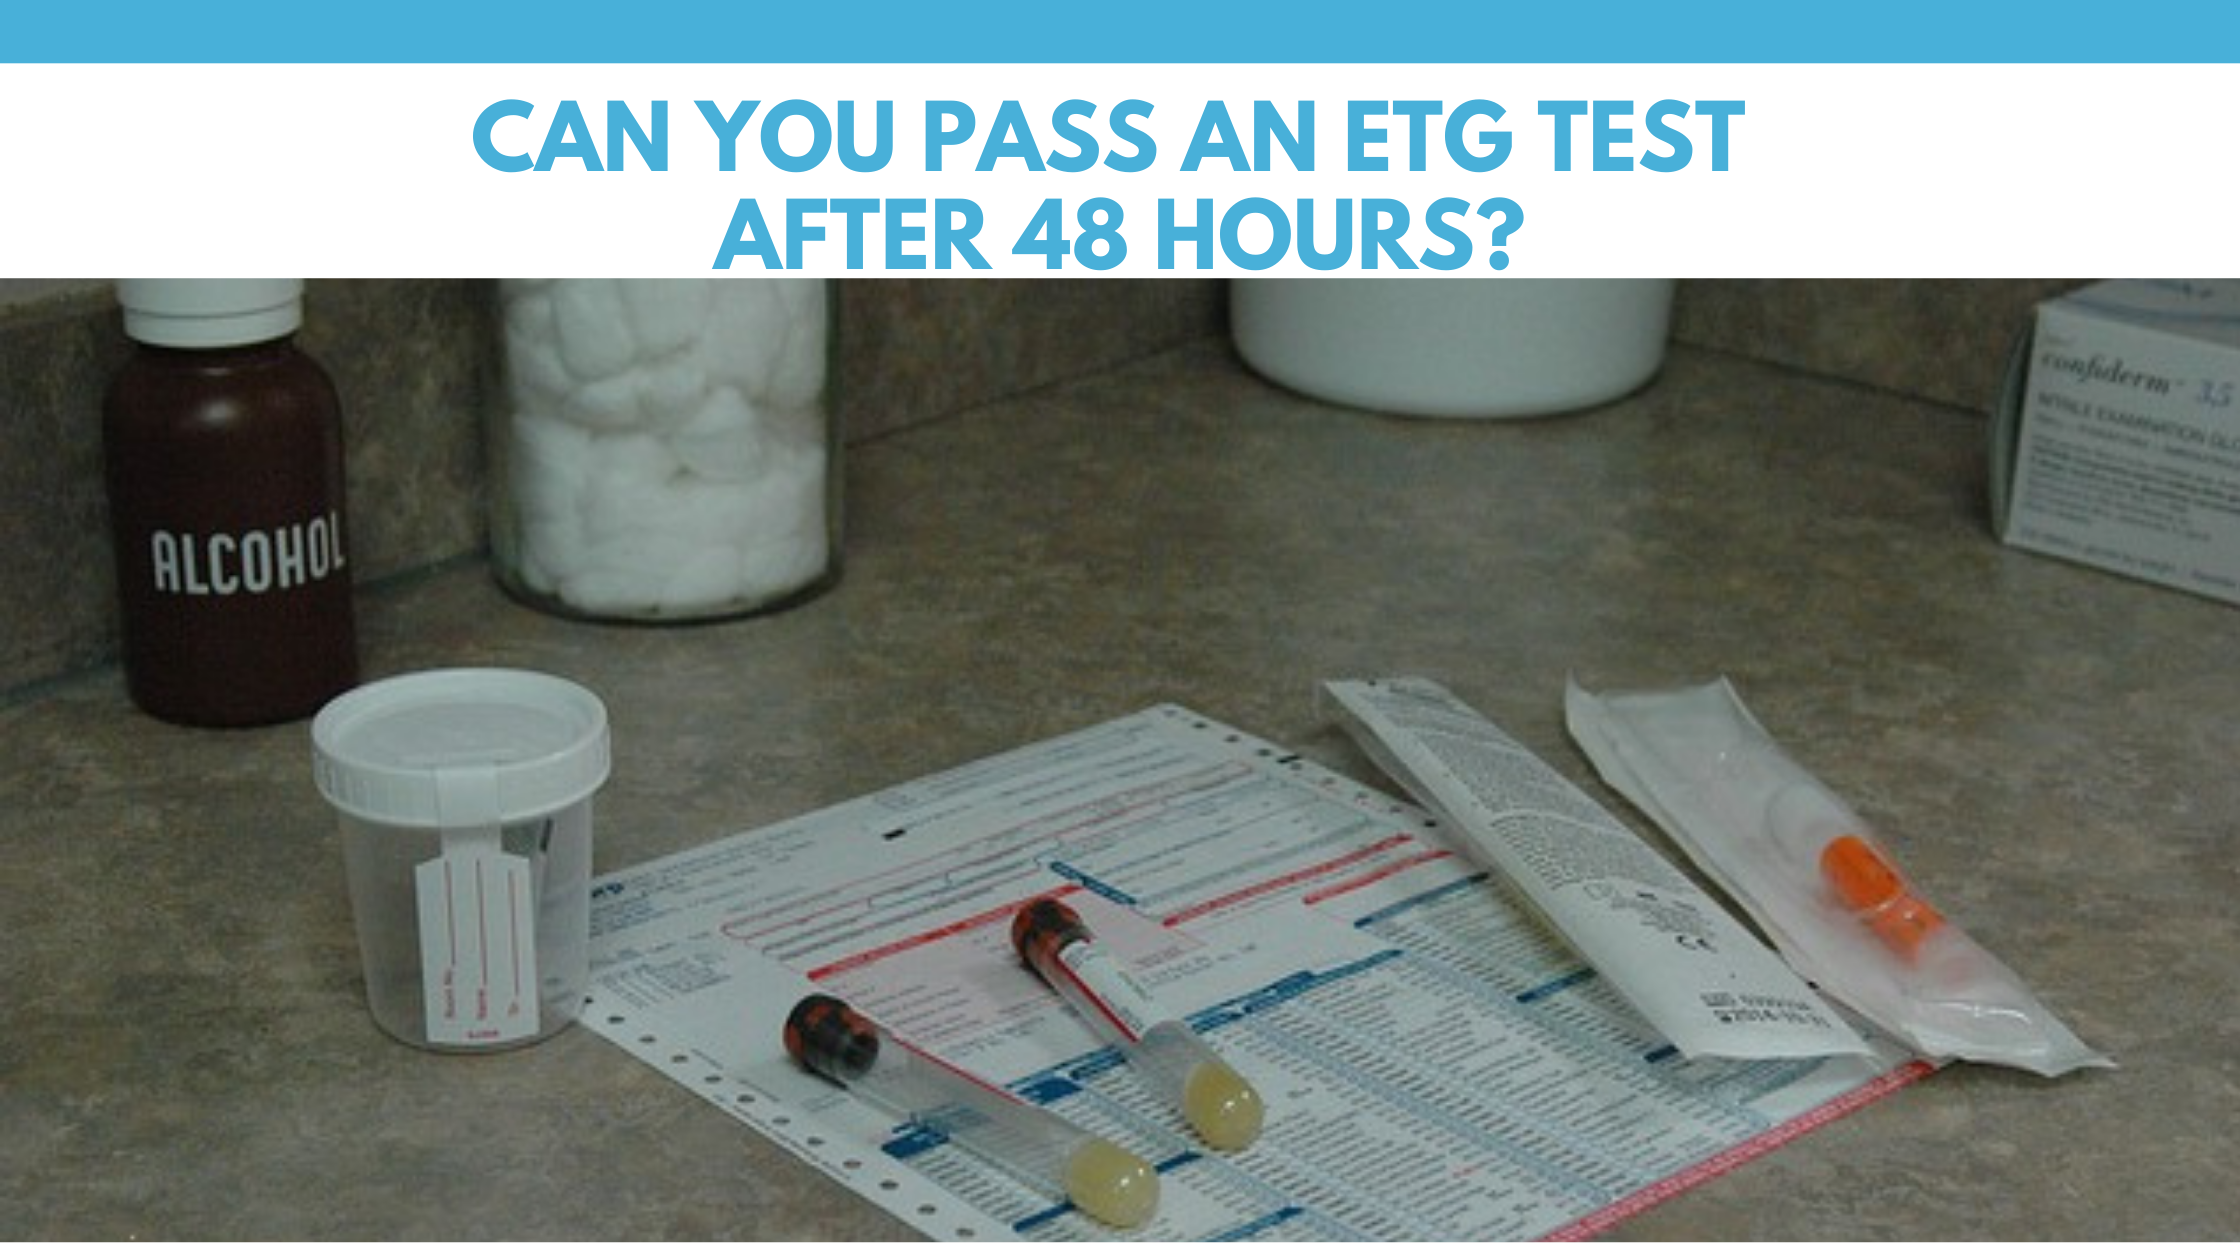 Can You Pass An EtG Test After 48 Hours?